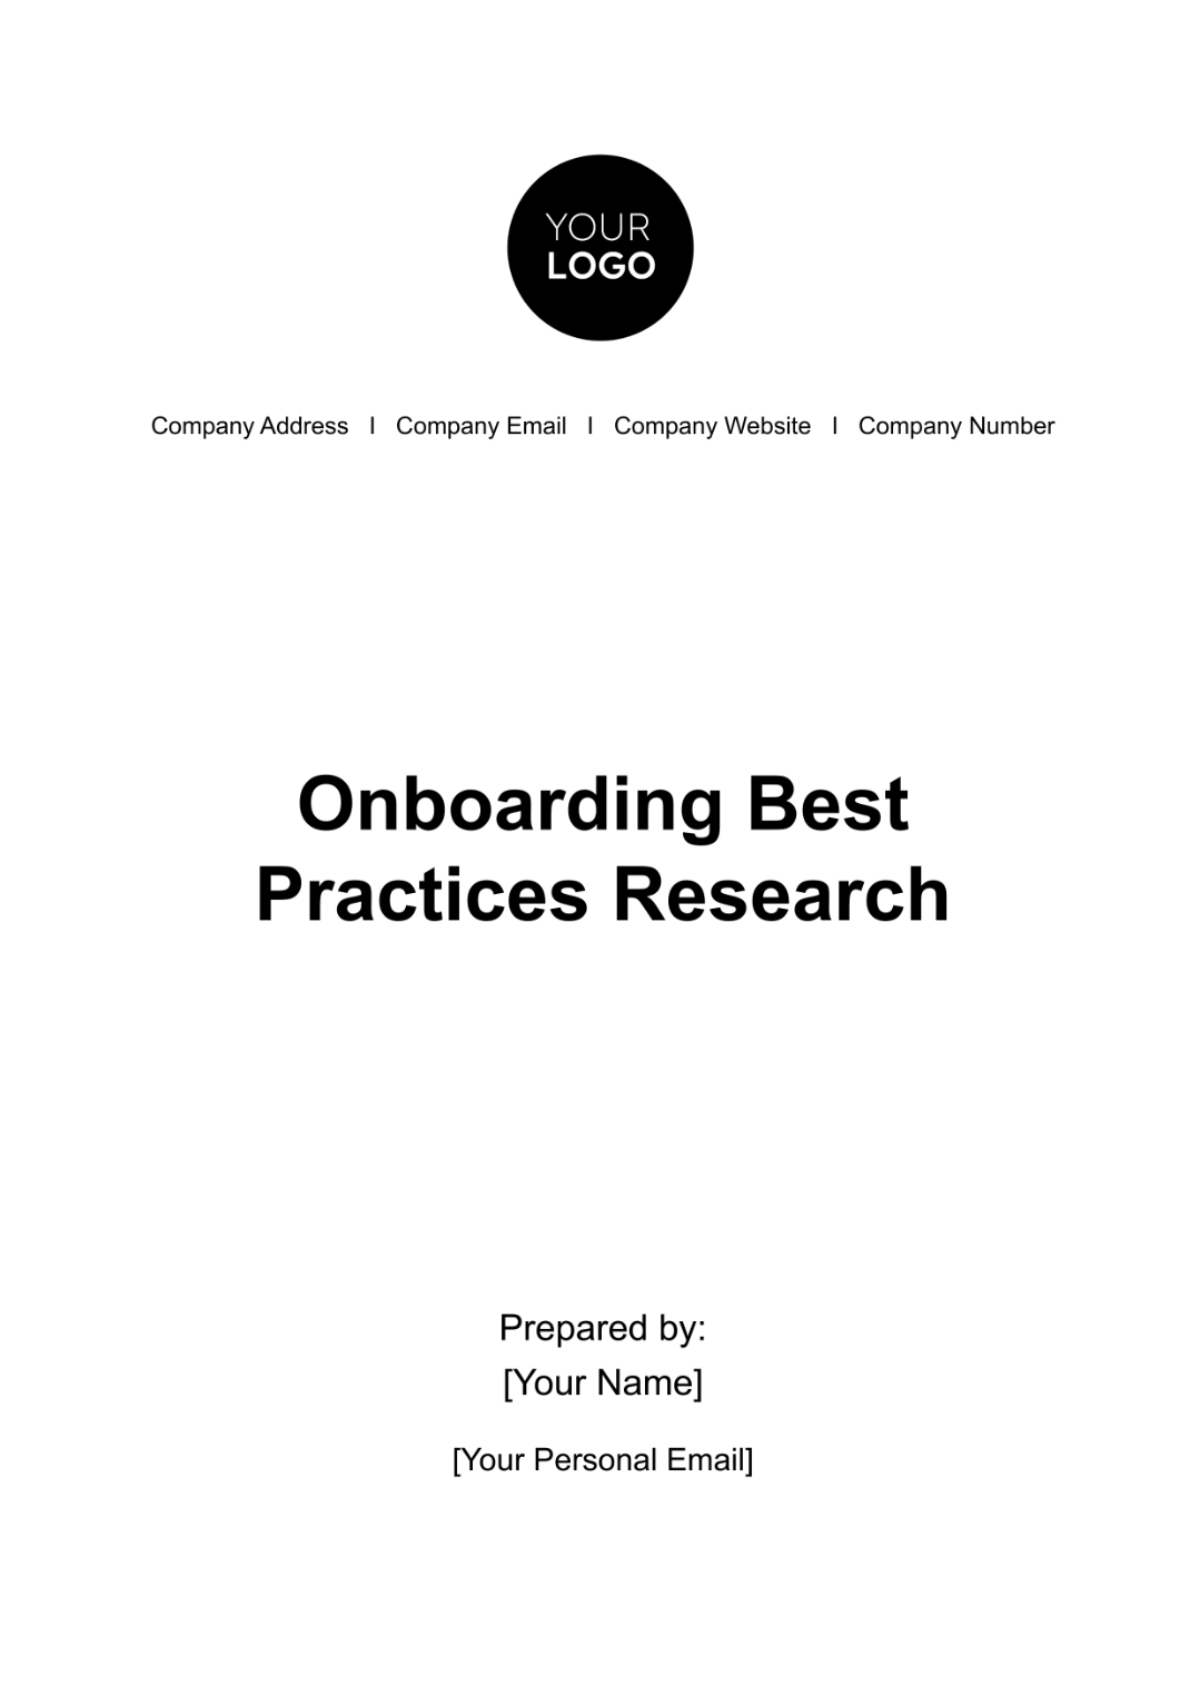 Free Onboarding Best Practices Research HR Template